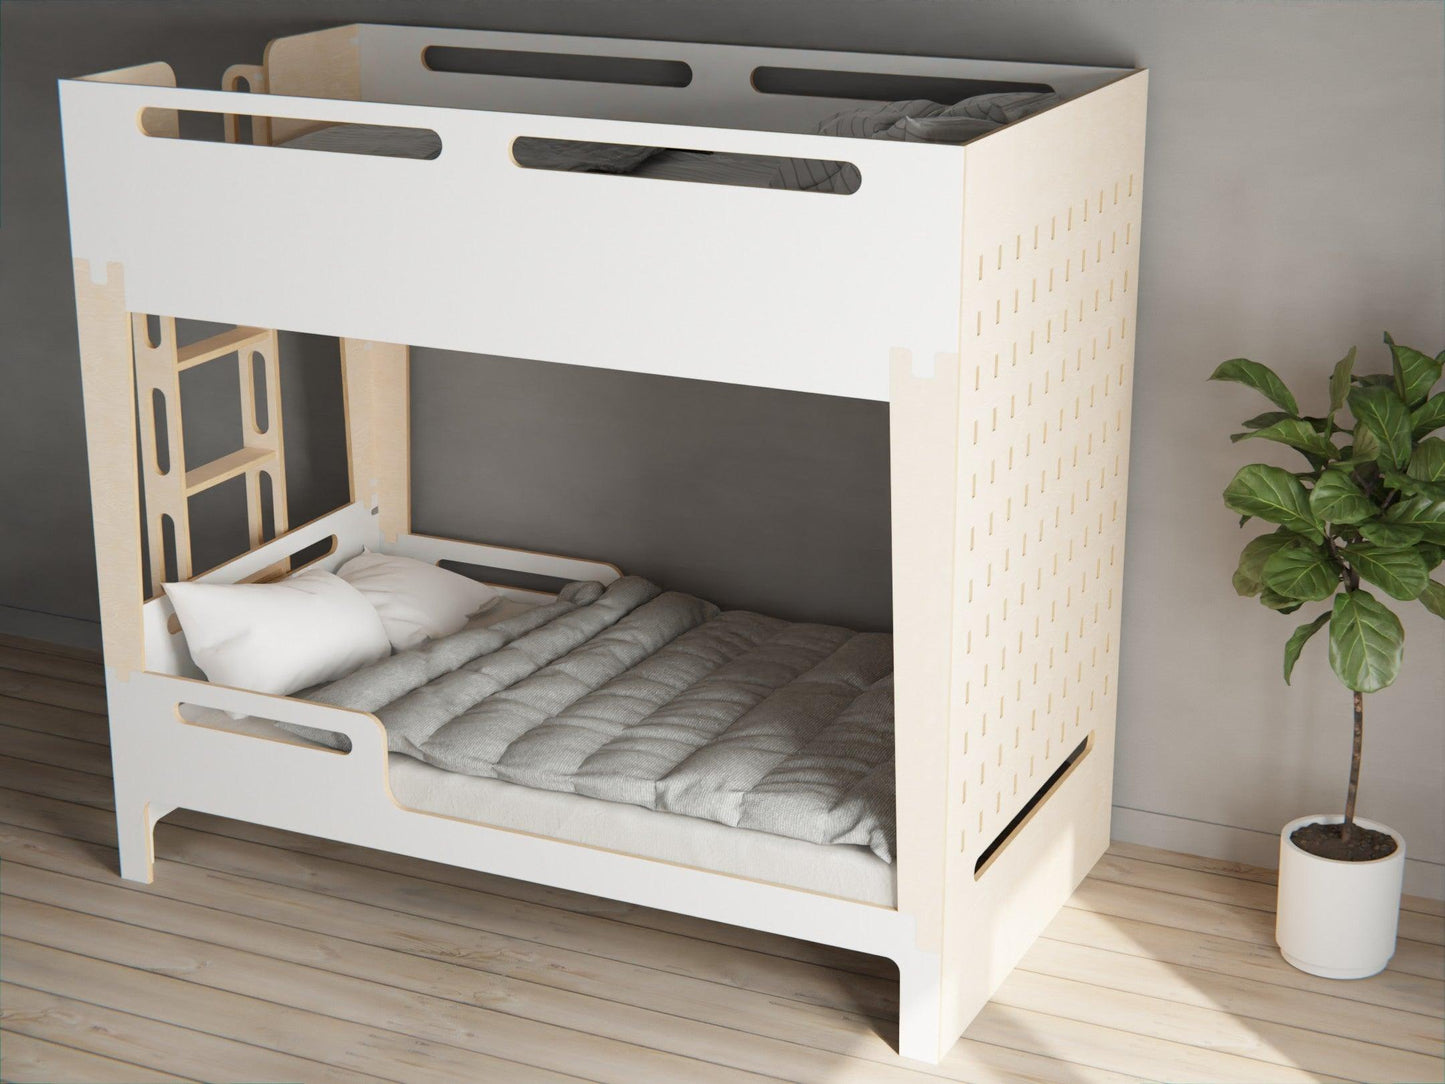 Scandinavian-style white bunk beds to elevate your comfort. Made from high-quality plywood.